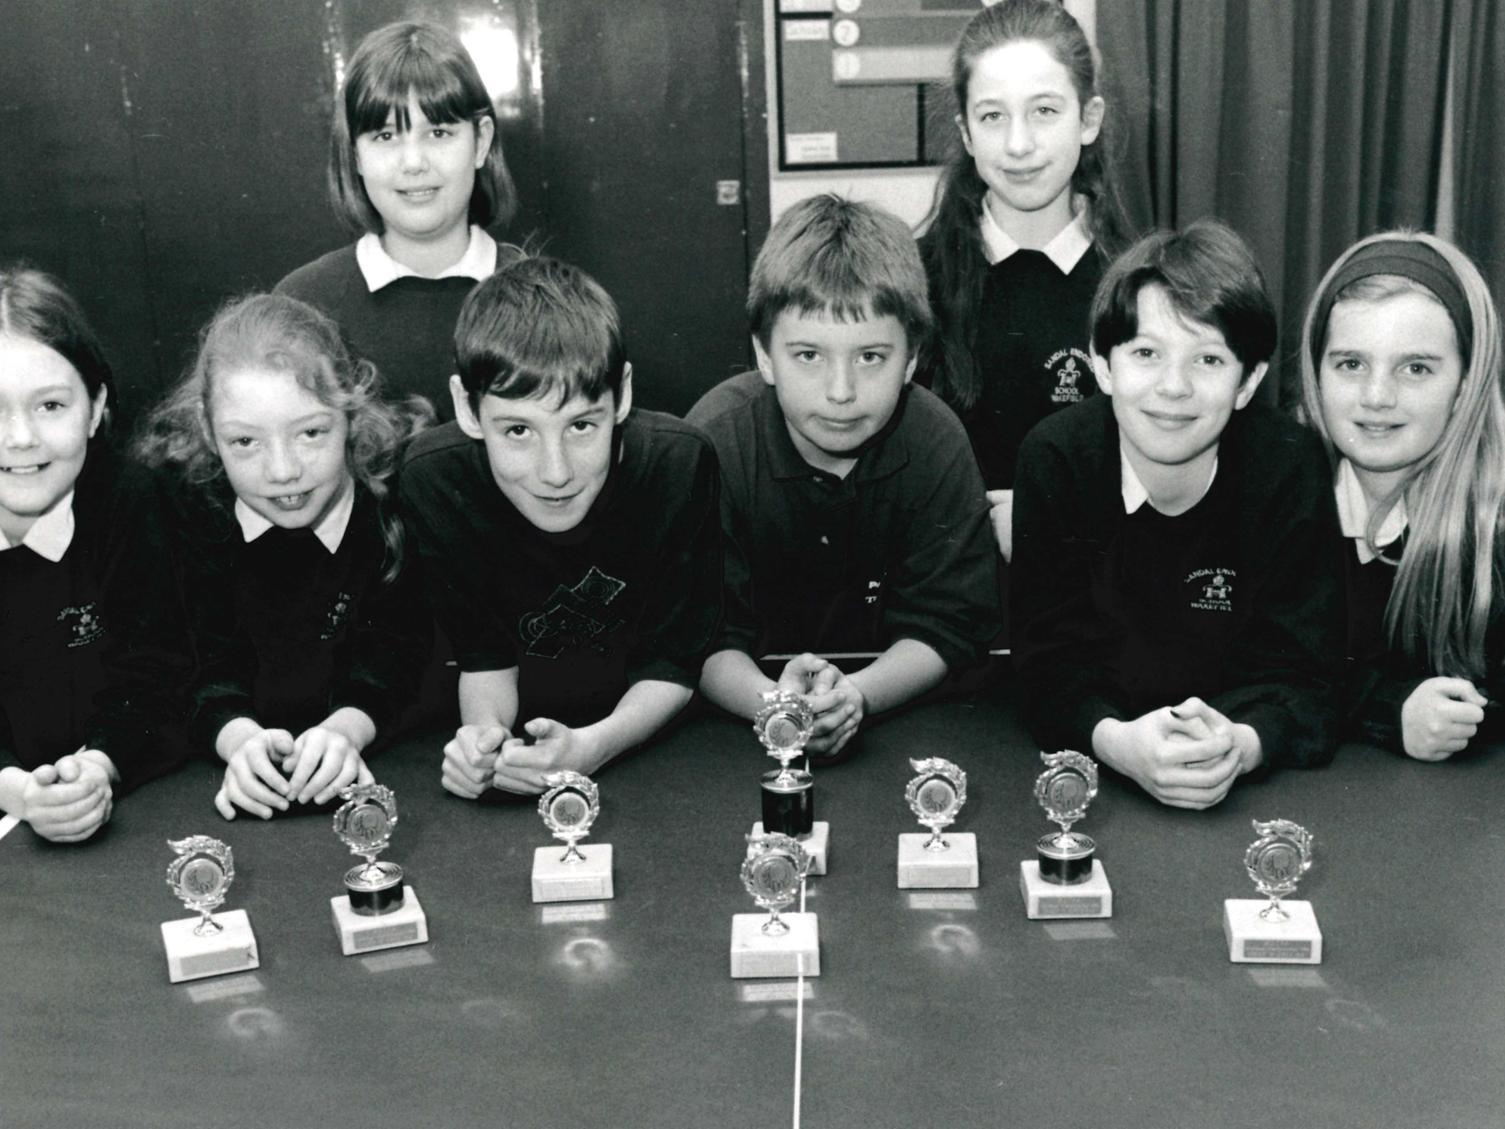 Sandal Endowed Middle School. Table tennis champions. Published in the Wakefield Express 4.3.1994.